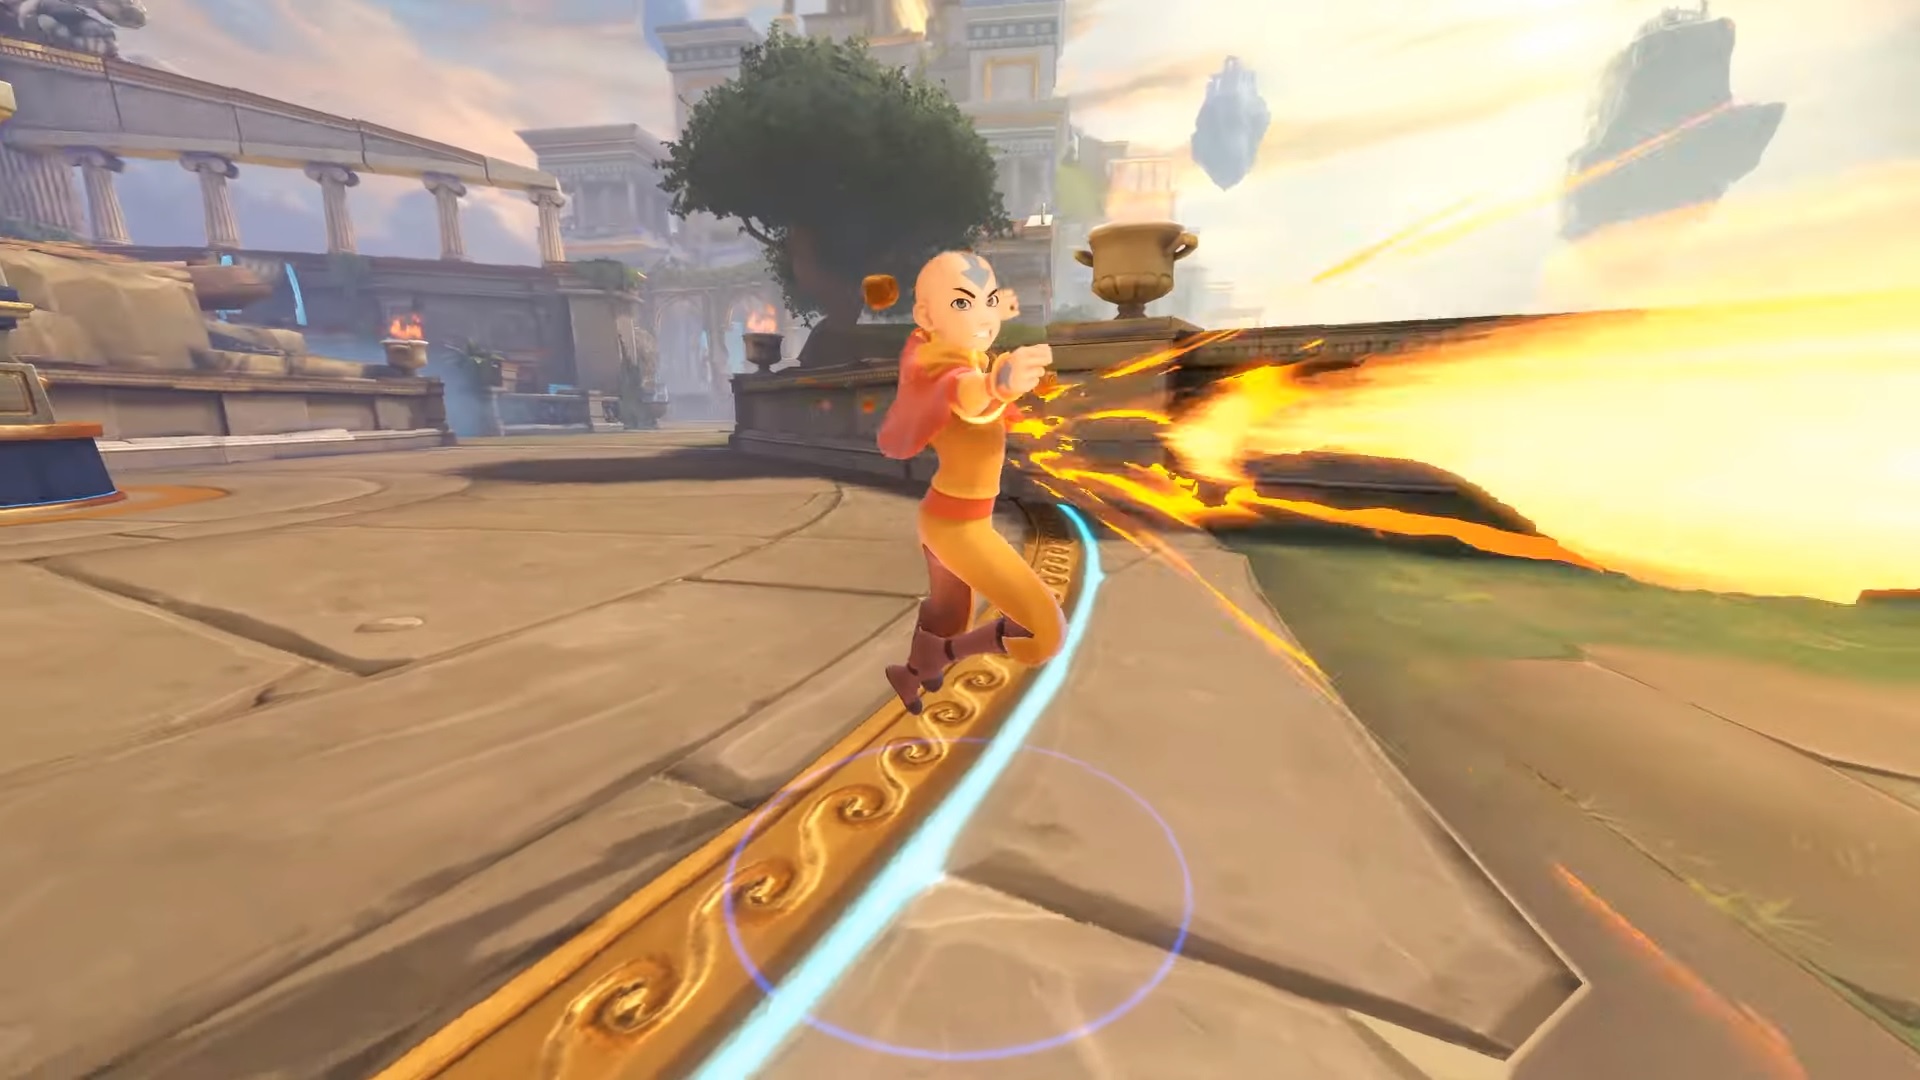 Smite is getting an Avatar: The Last Airbender crossover | PC Gamer